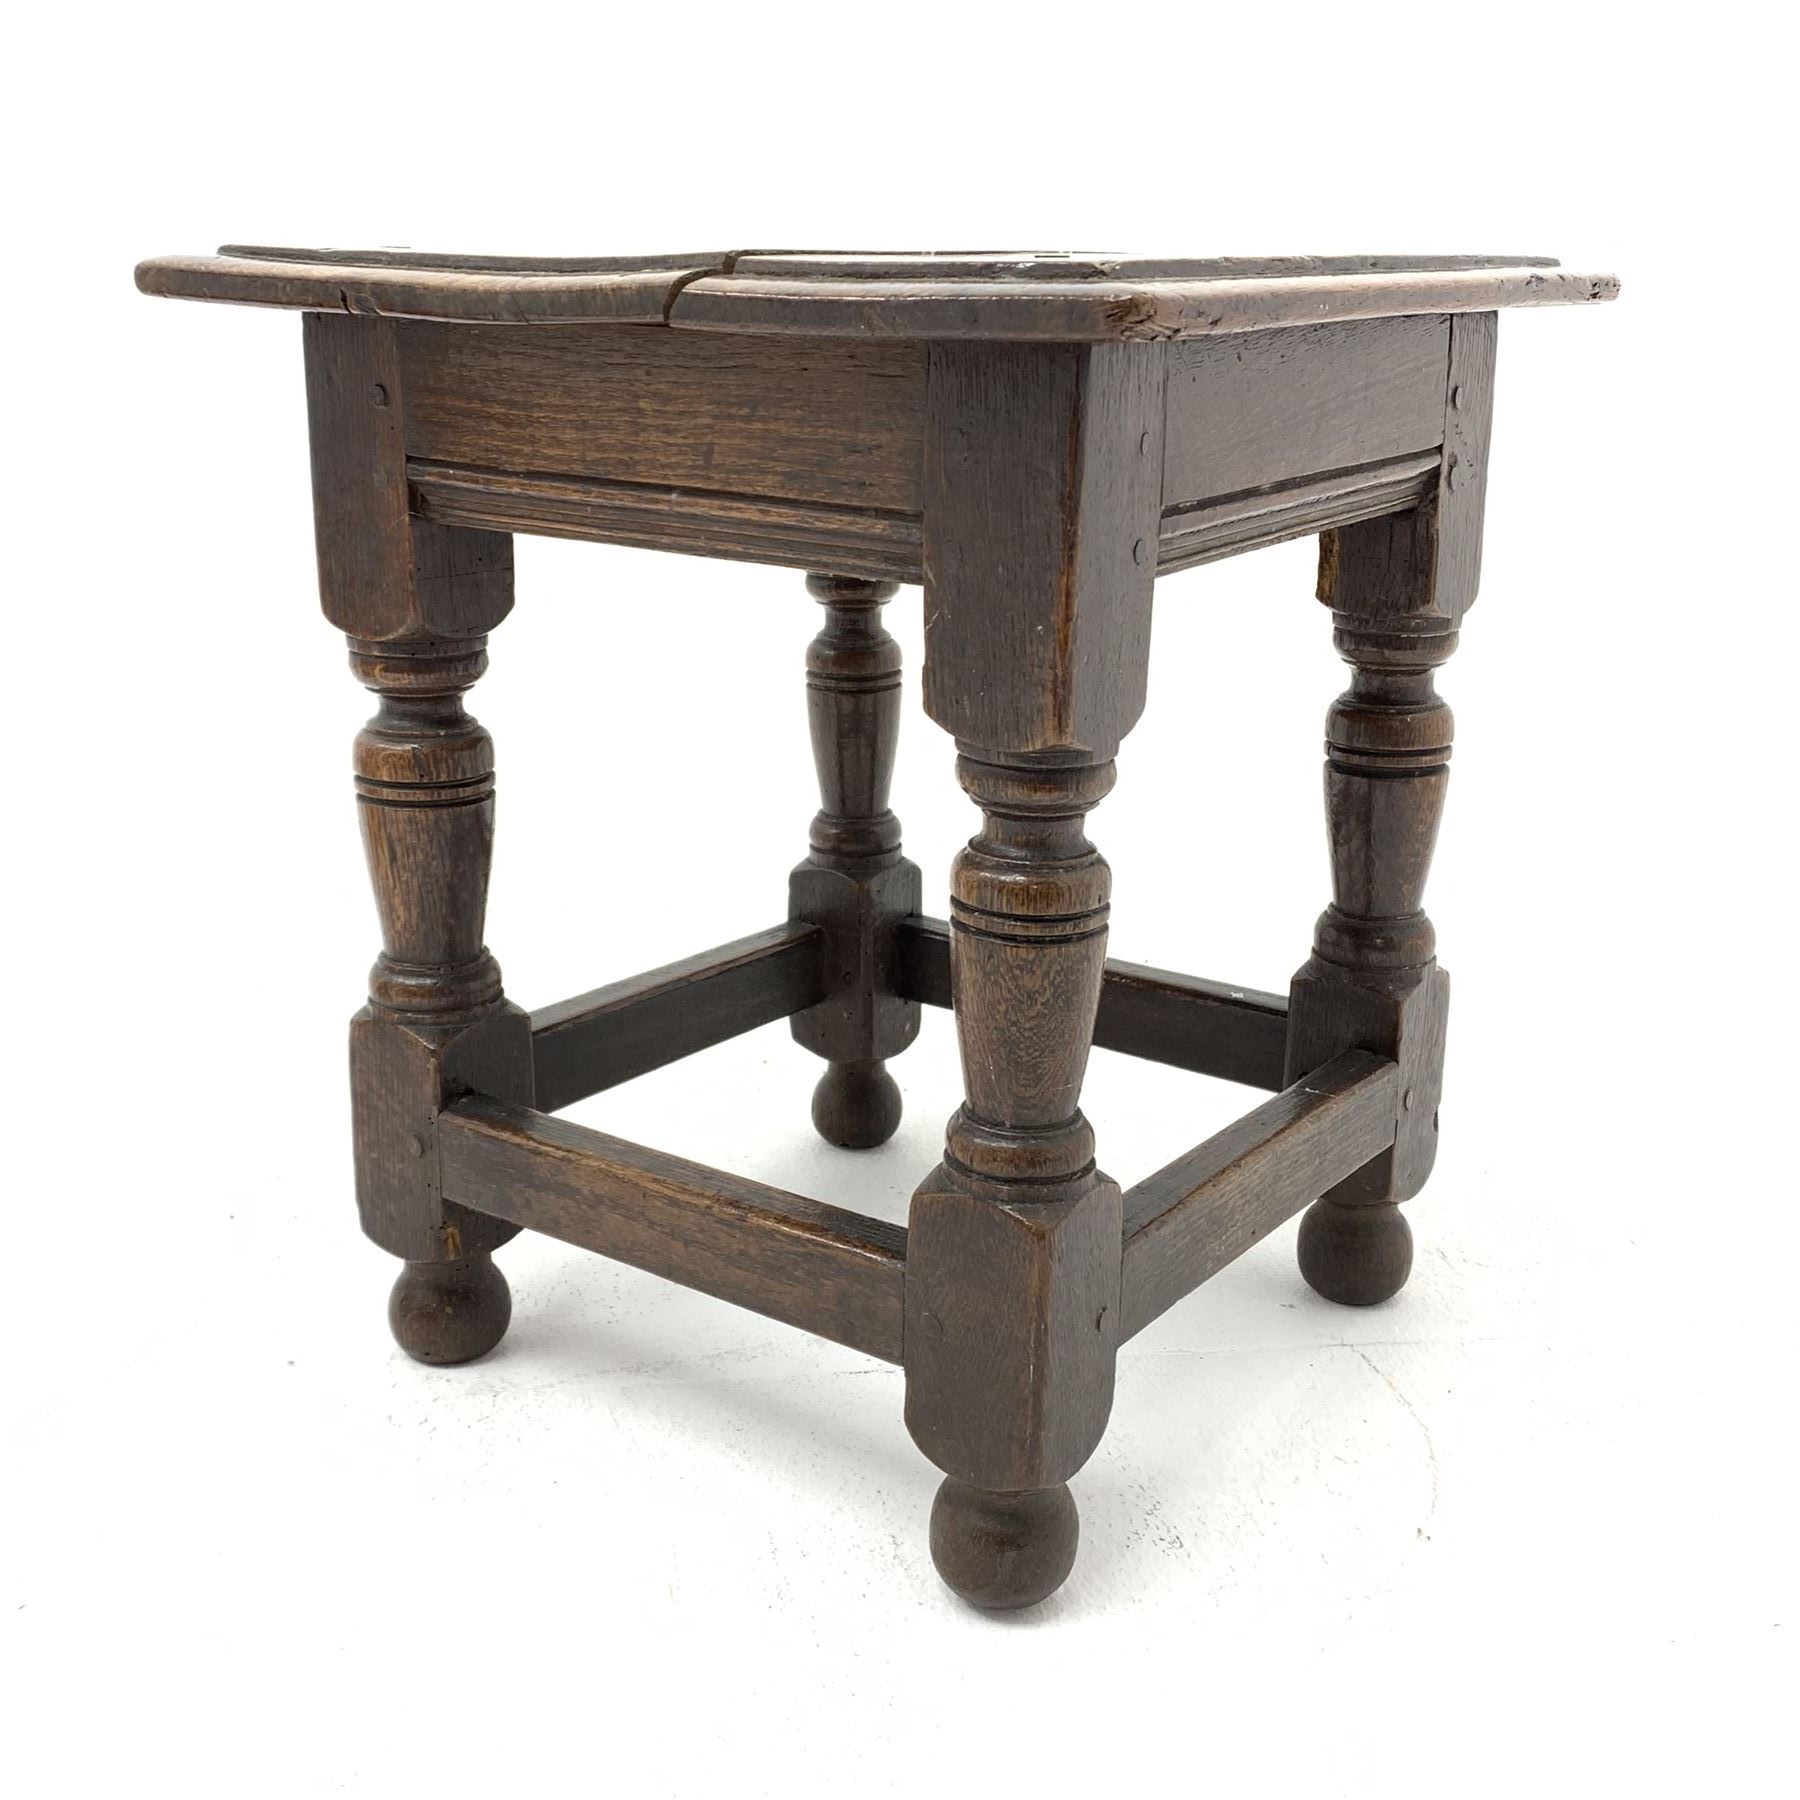 Small 18th century oak table - Image 2 of 3